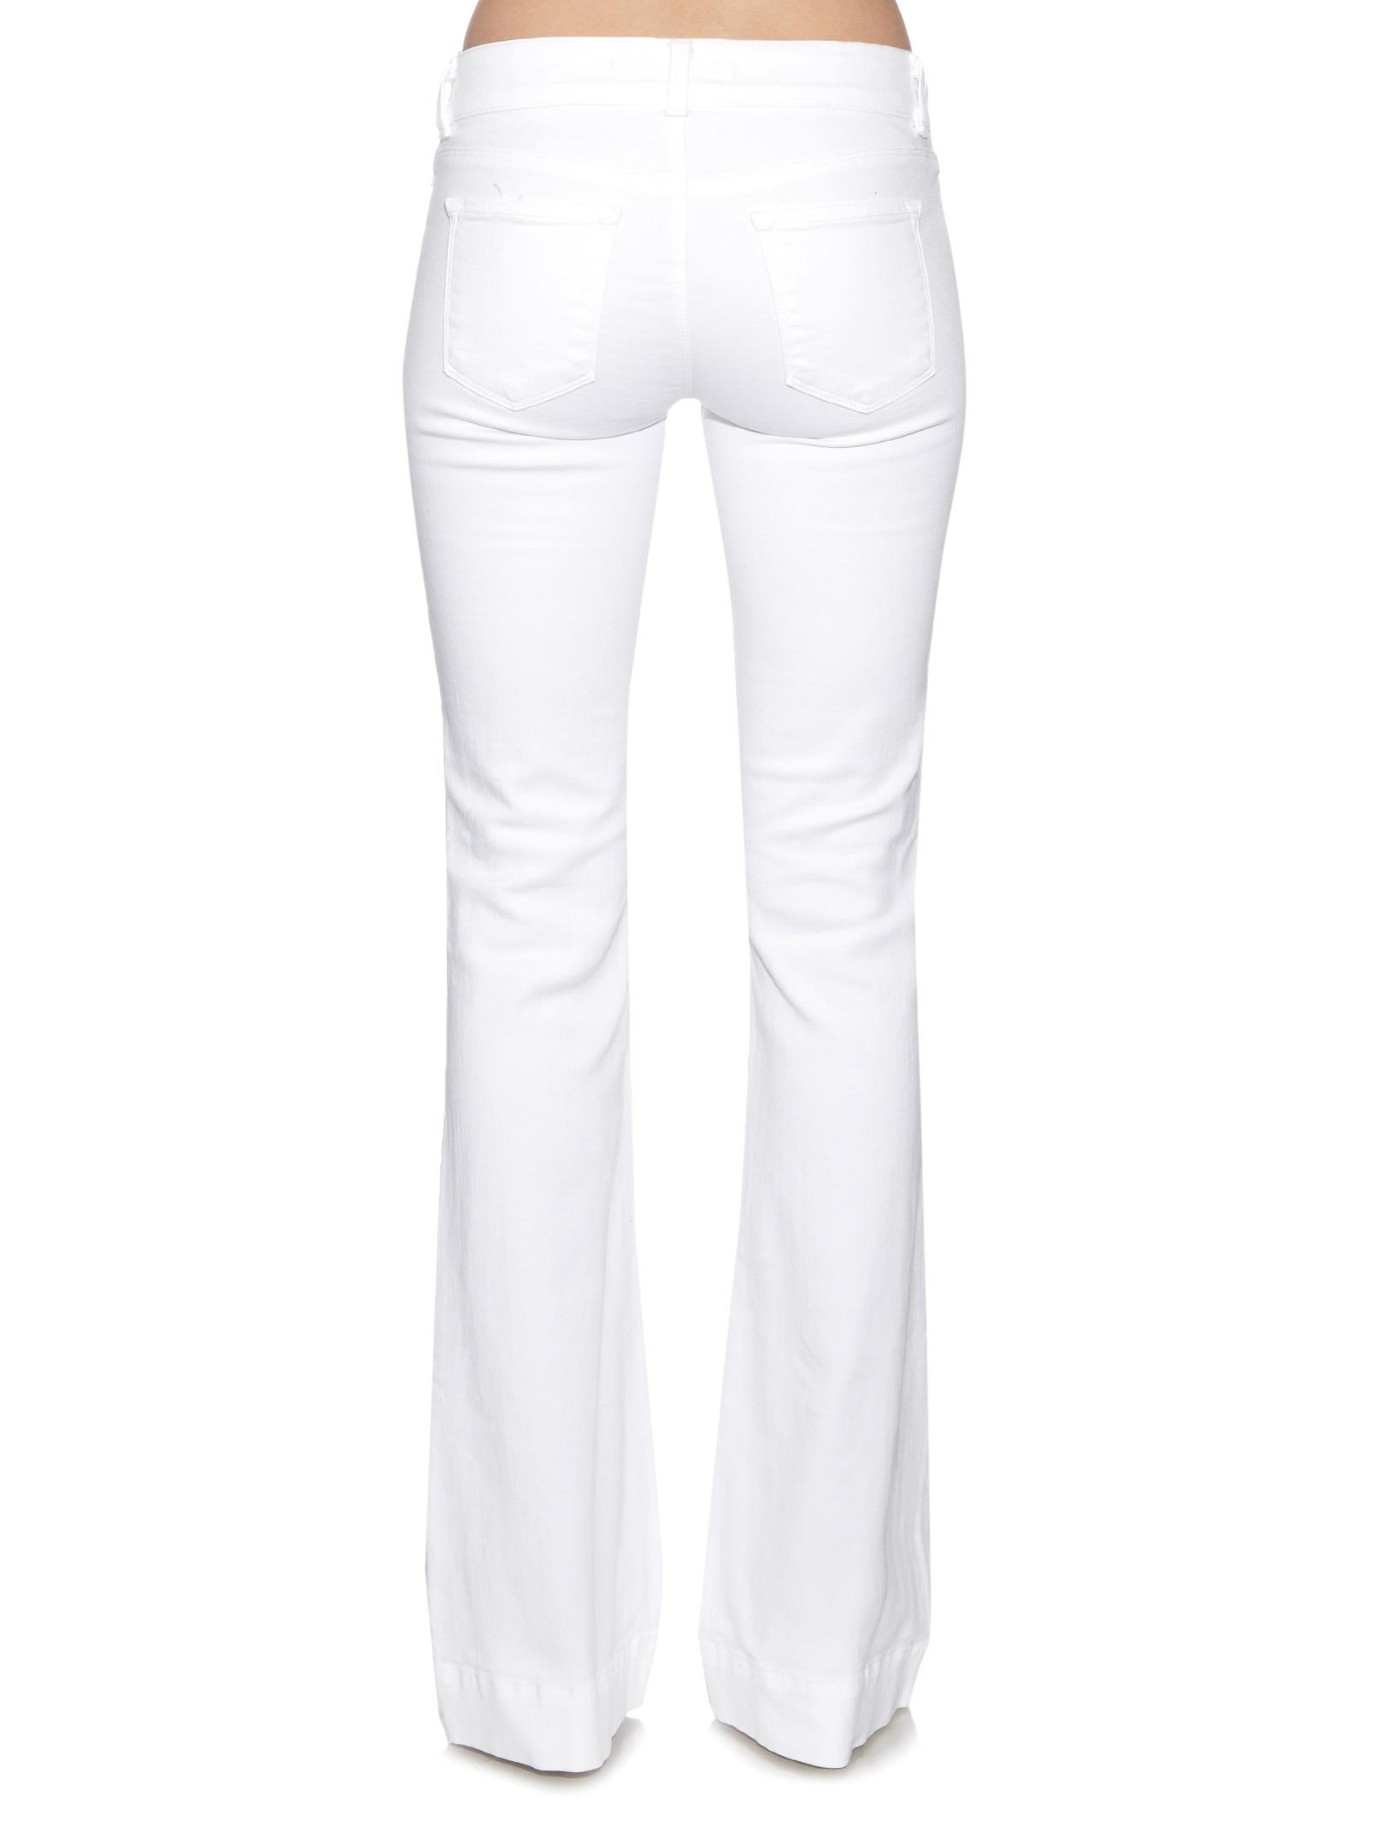 Lyst - J Brand Love Story Low-rise Flared Jeans in White